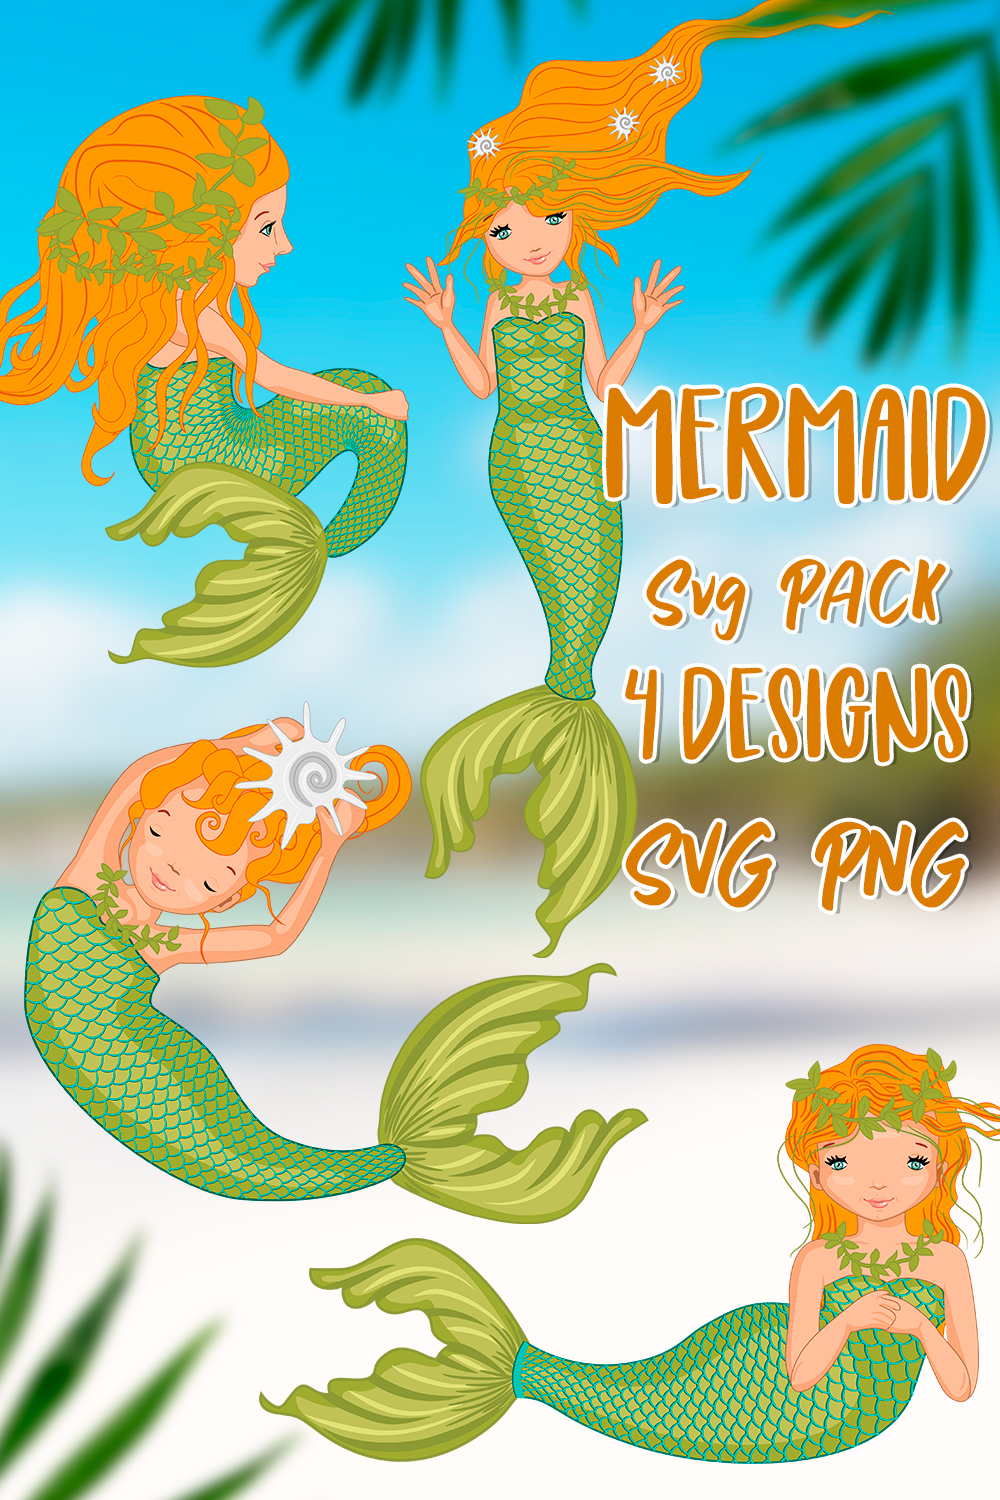 Preview on pinterest images of mermaids.